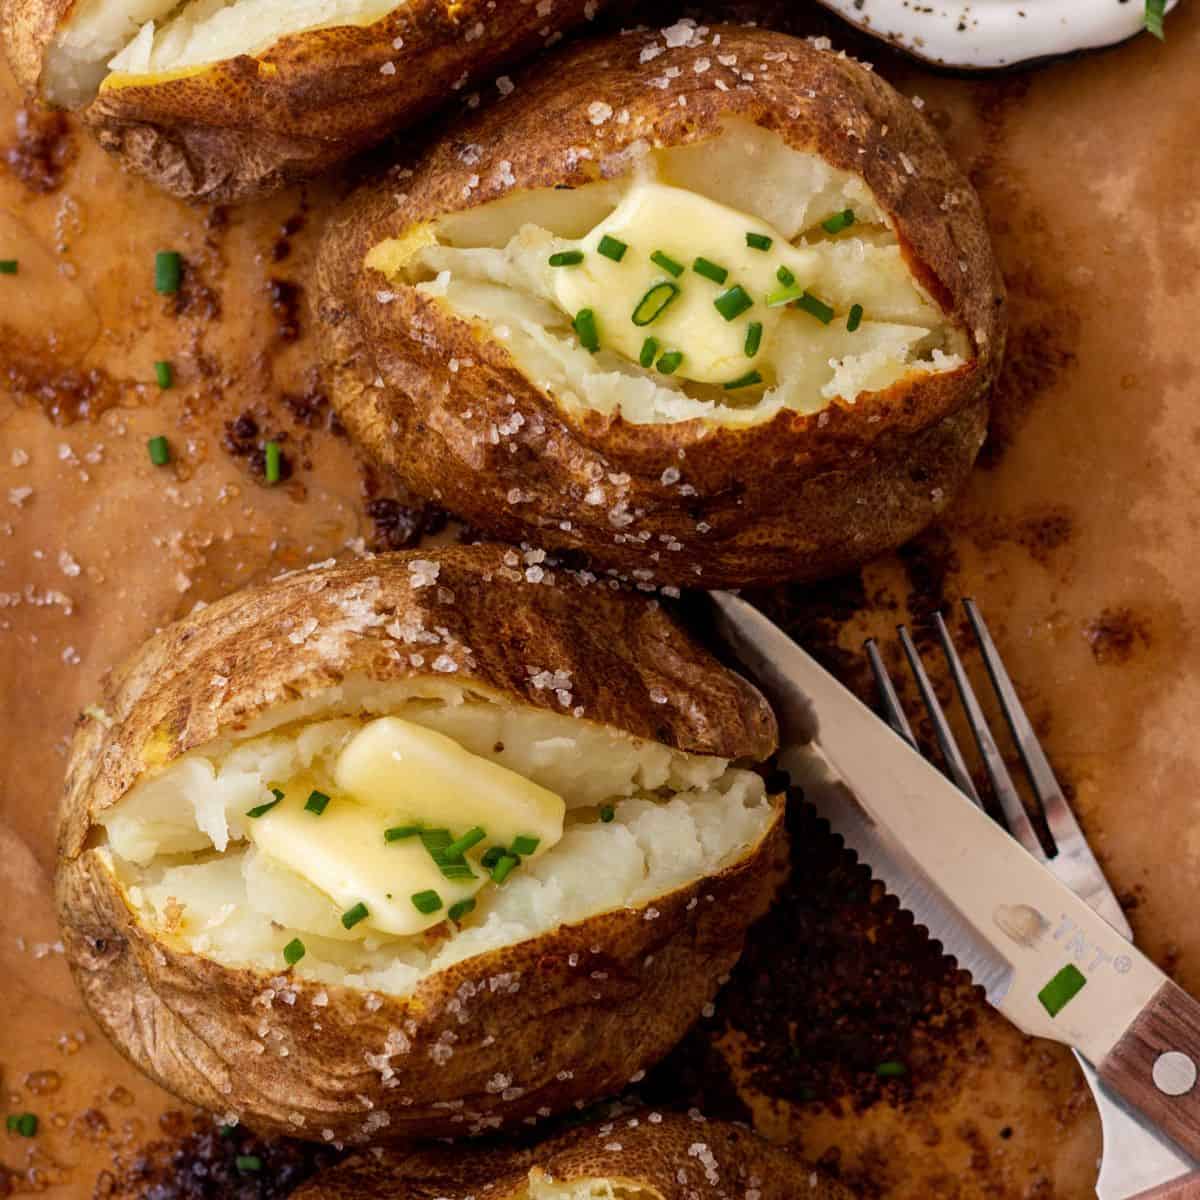 Two baked potatoes, cut open with butter and chives, on parchment paper with a fork and knife.